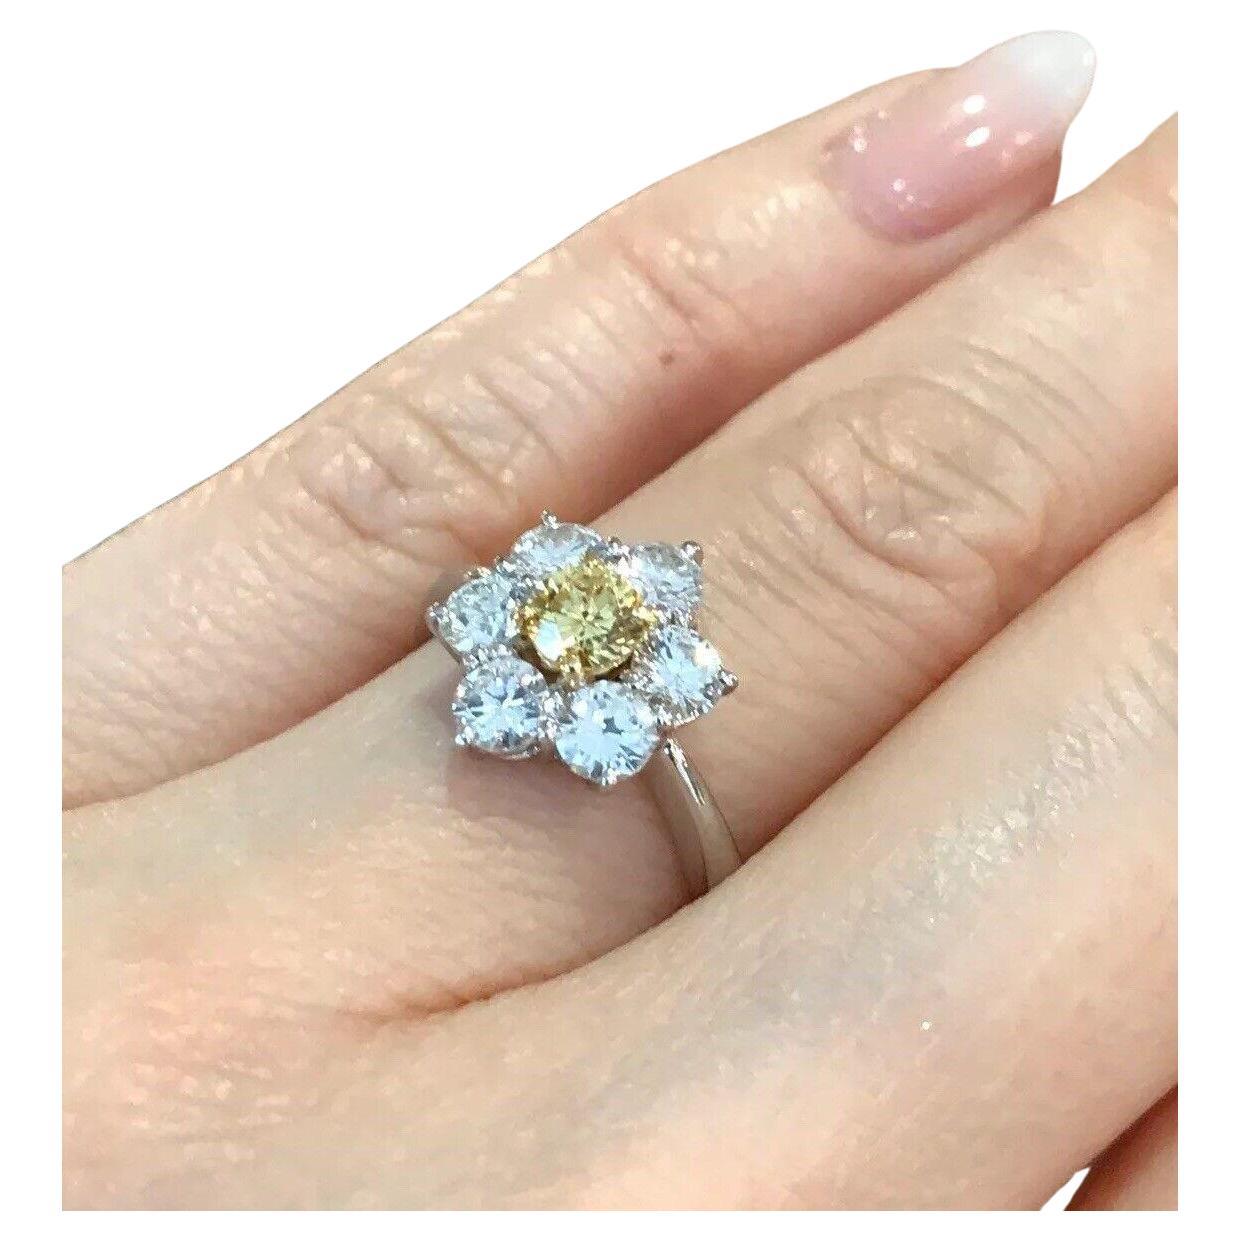 GIA Certified Fancy Intense Yellow Diamond Floret Ring in Platinum & 18k Gold

Diamond Floret Ring features a GIA Certified Natural Fancy Intense Yellow Diamond in the center, weighing 0.42 carats, surrounded by 1.22 carats of Round Brilliant